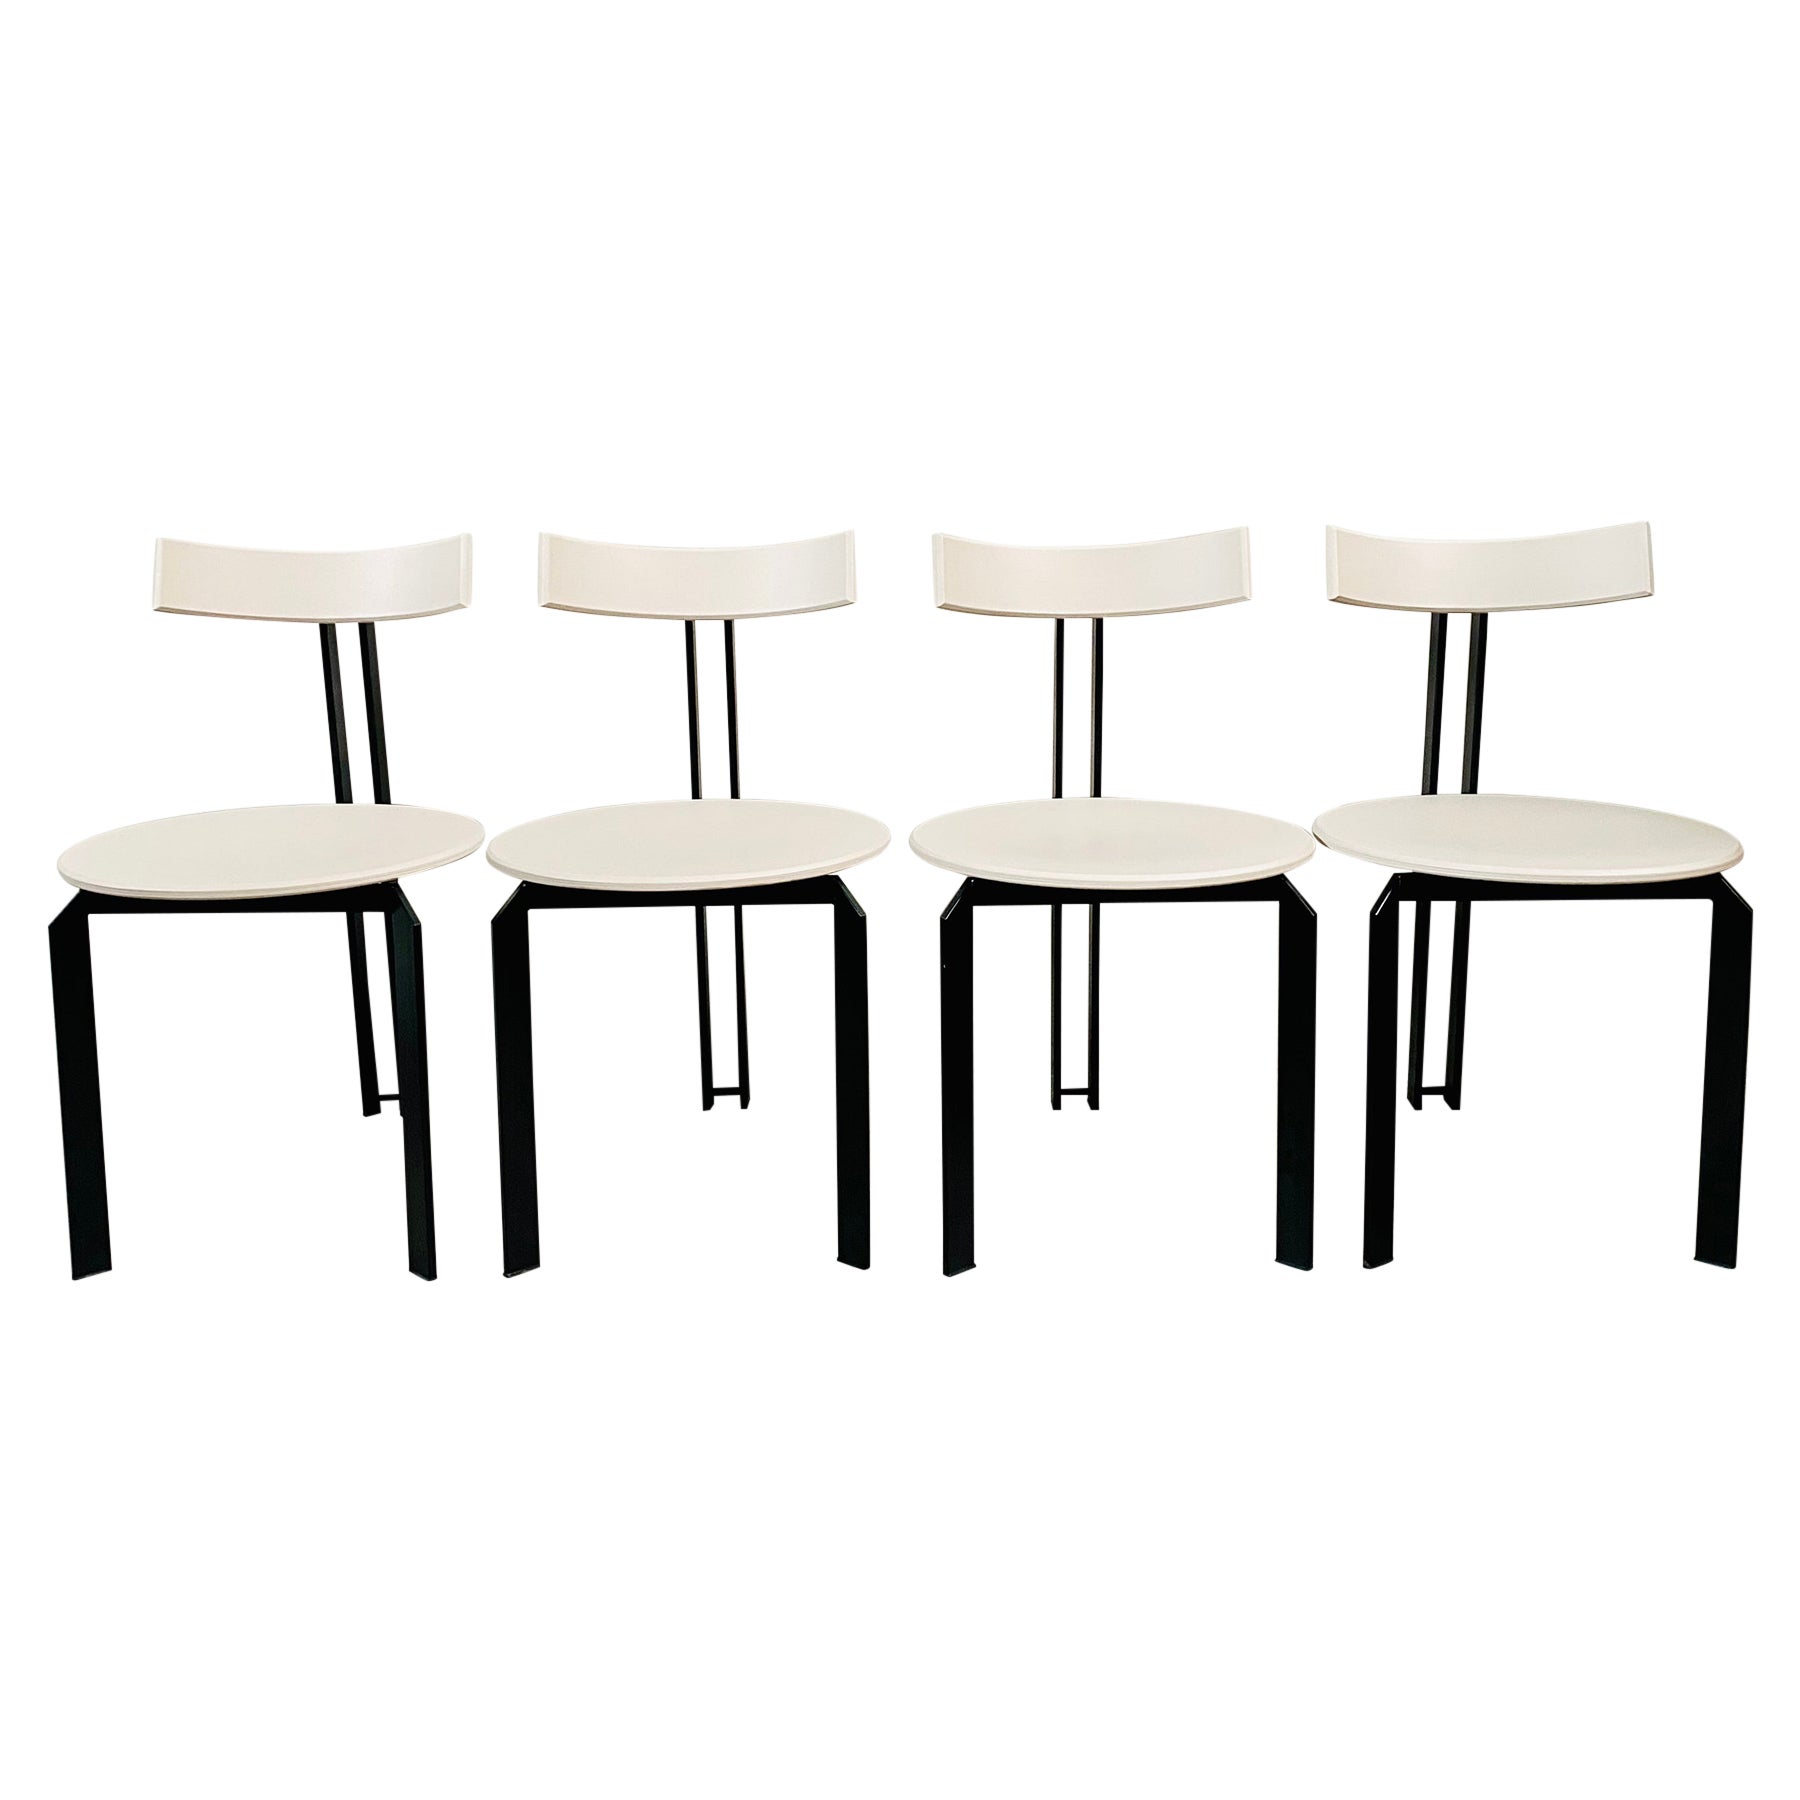 4 x Brutalist ZETA Dining Chairs by Martin Haksteen for Harvink, Netherlands  For Sale